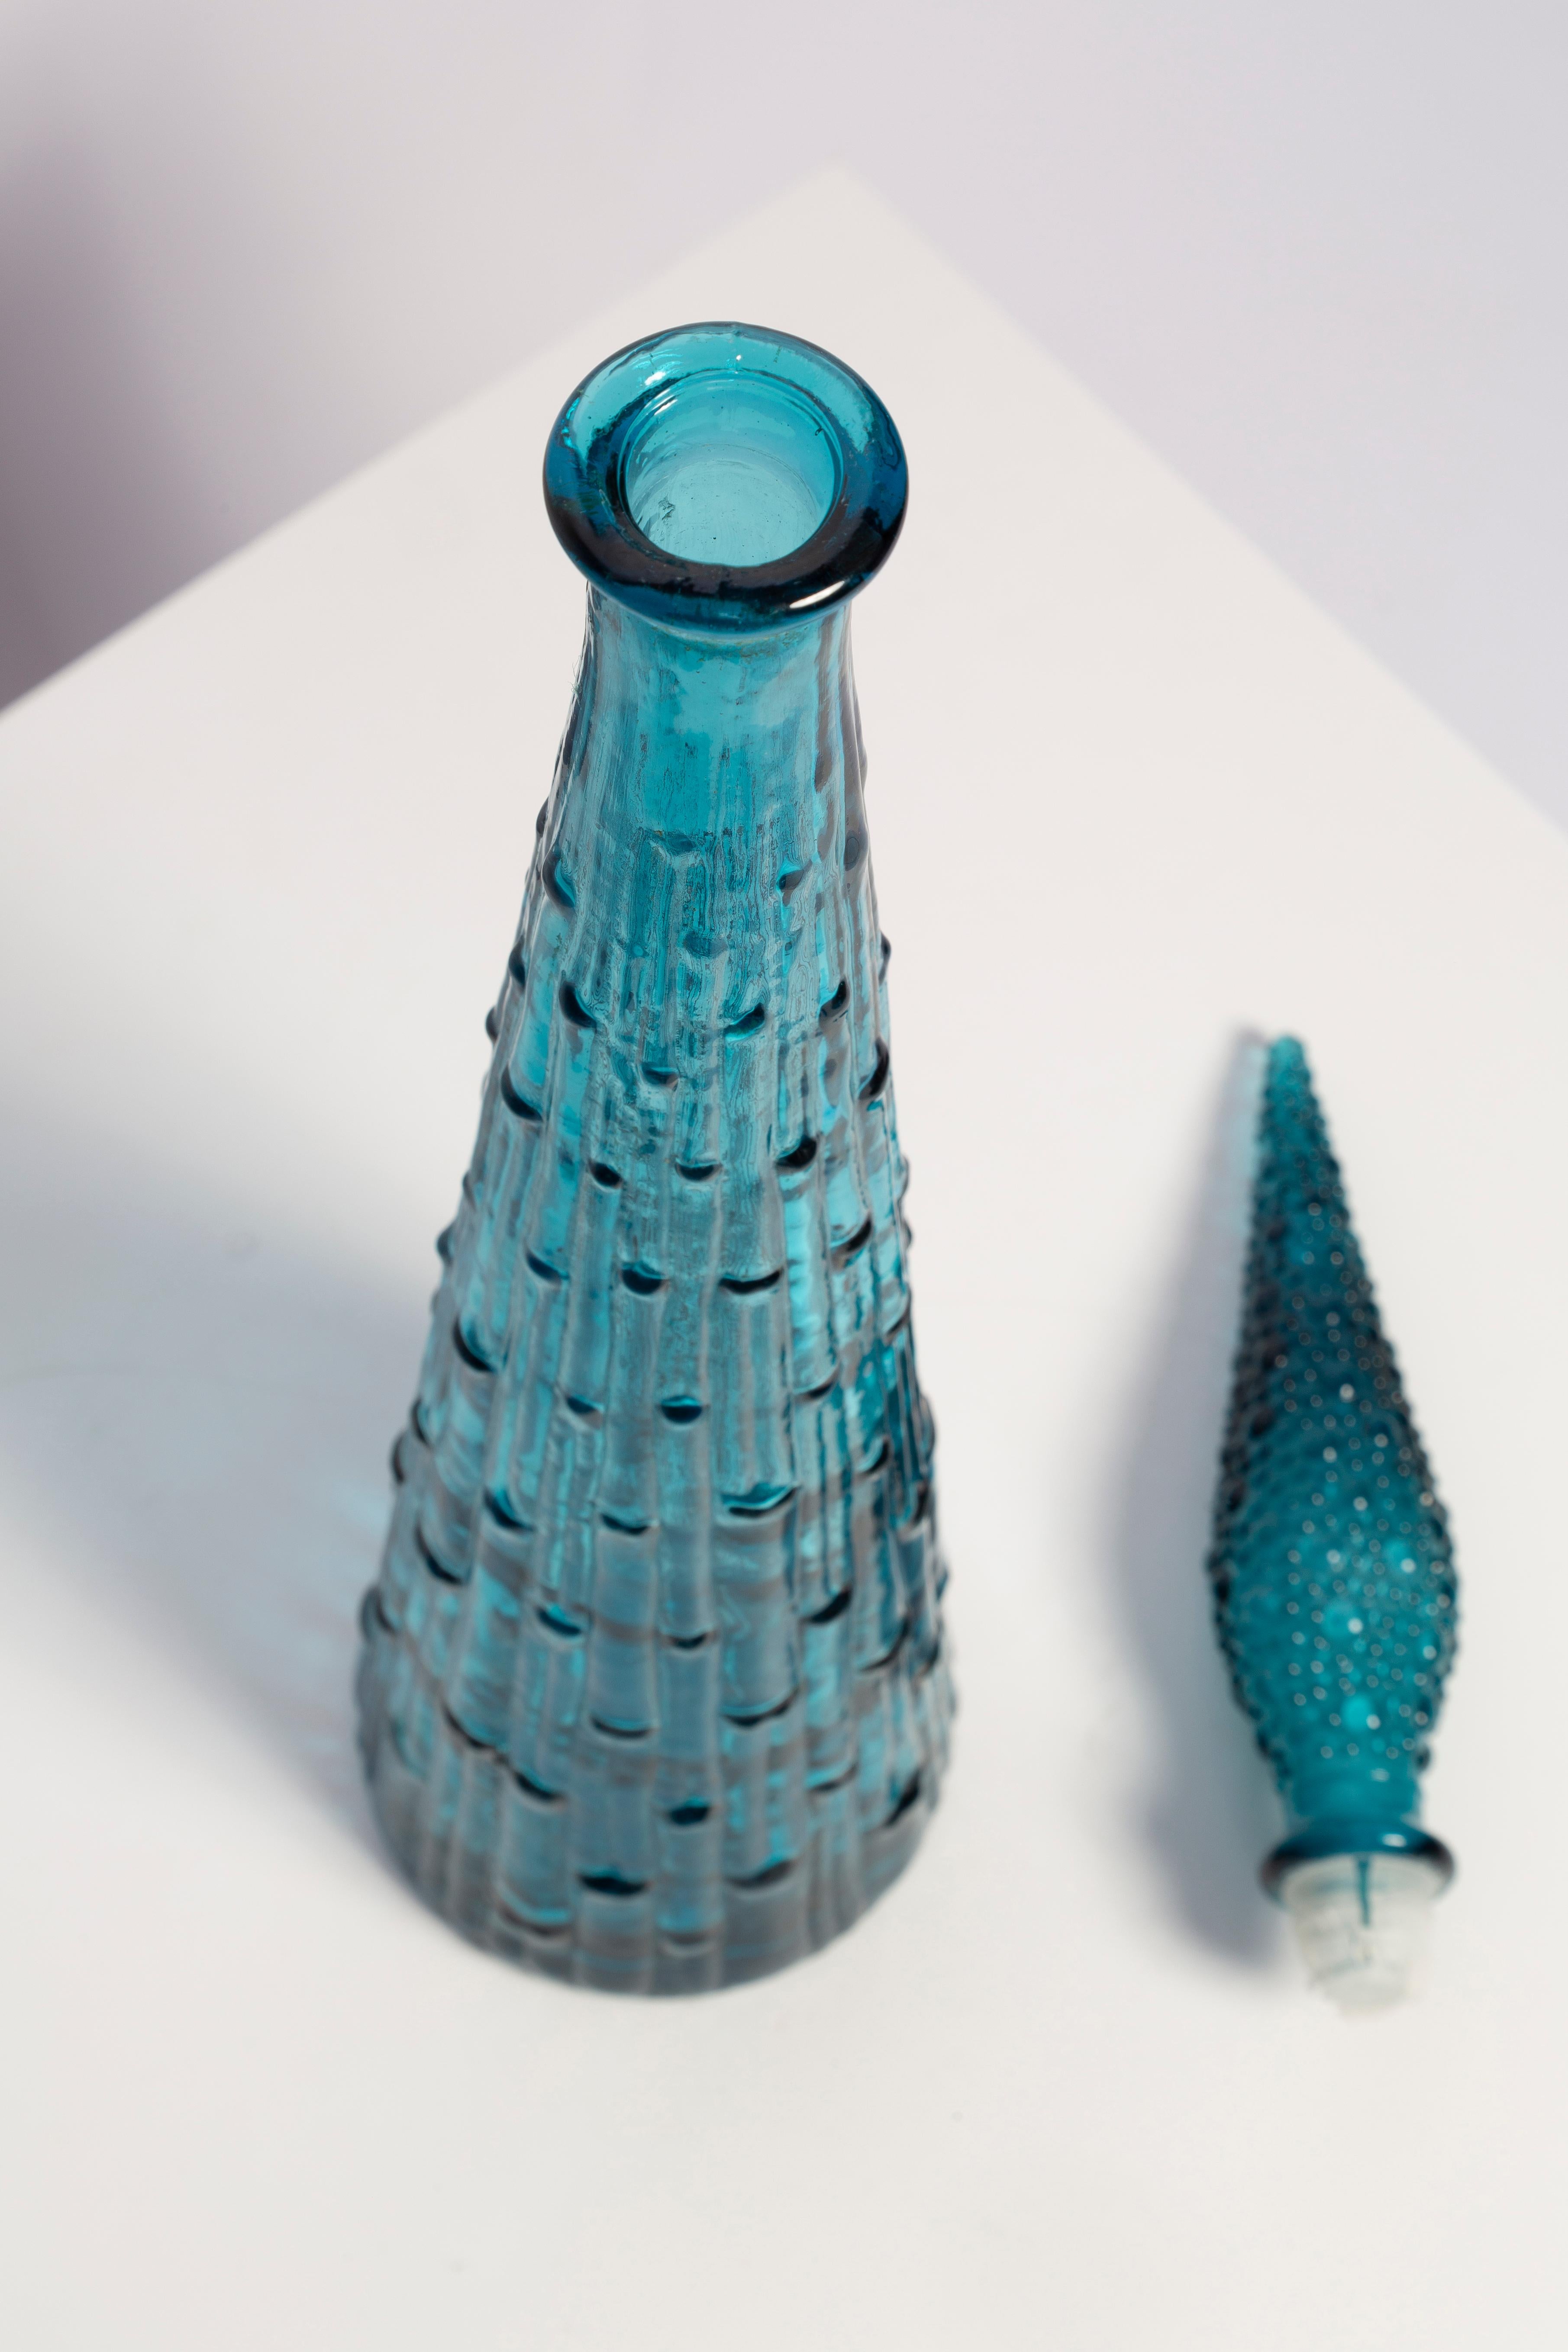 20th Century Mid-Century Blue Empoli Glass Genie Decanter Bottle with Stopper, Italy, 1960s For Sale